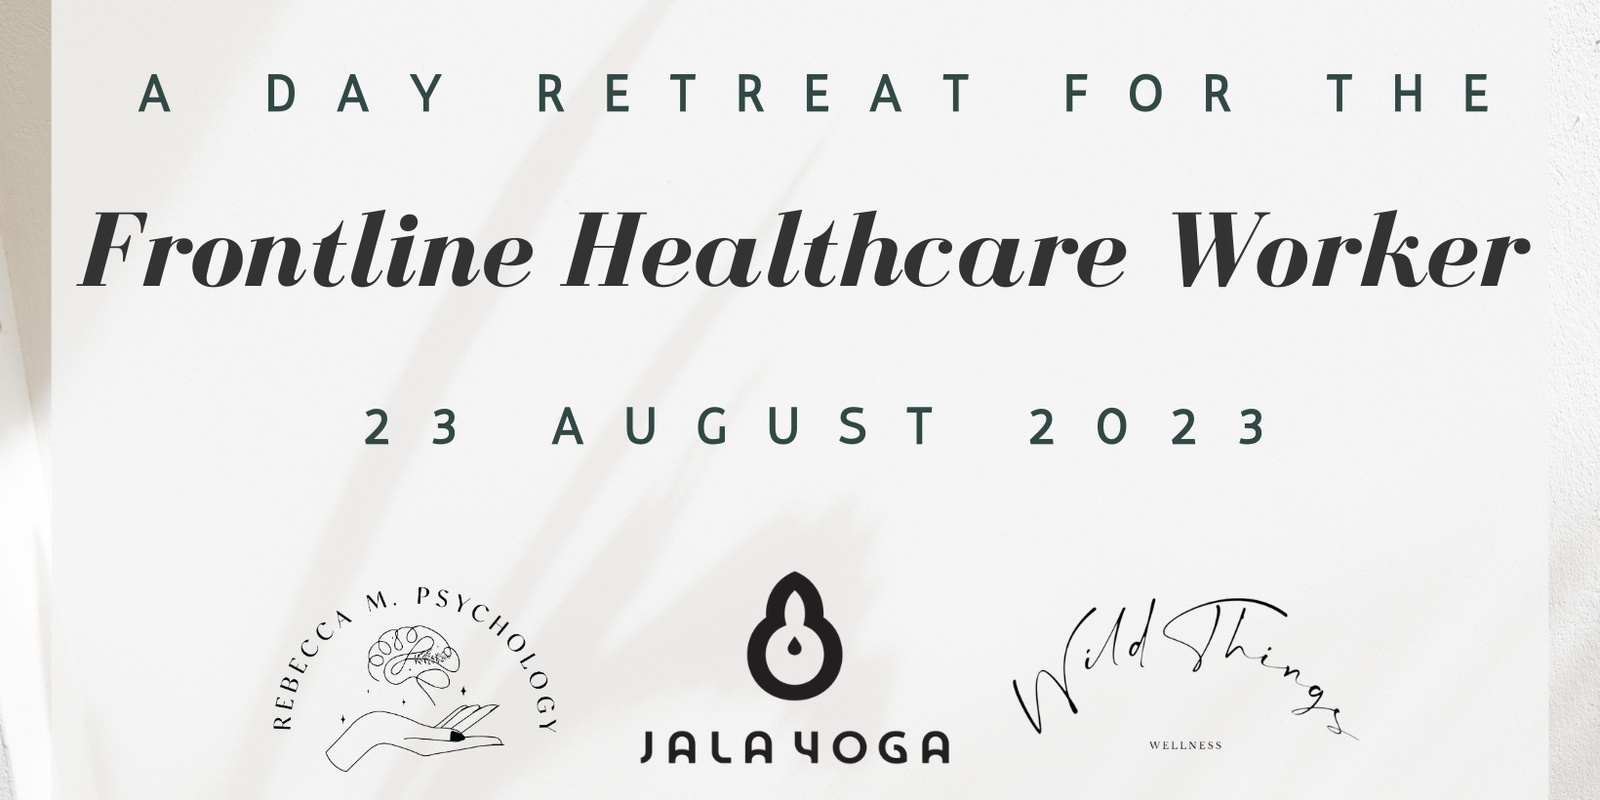 A Day Retreat for the Frontline Healthcare Worker 2.0